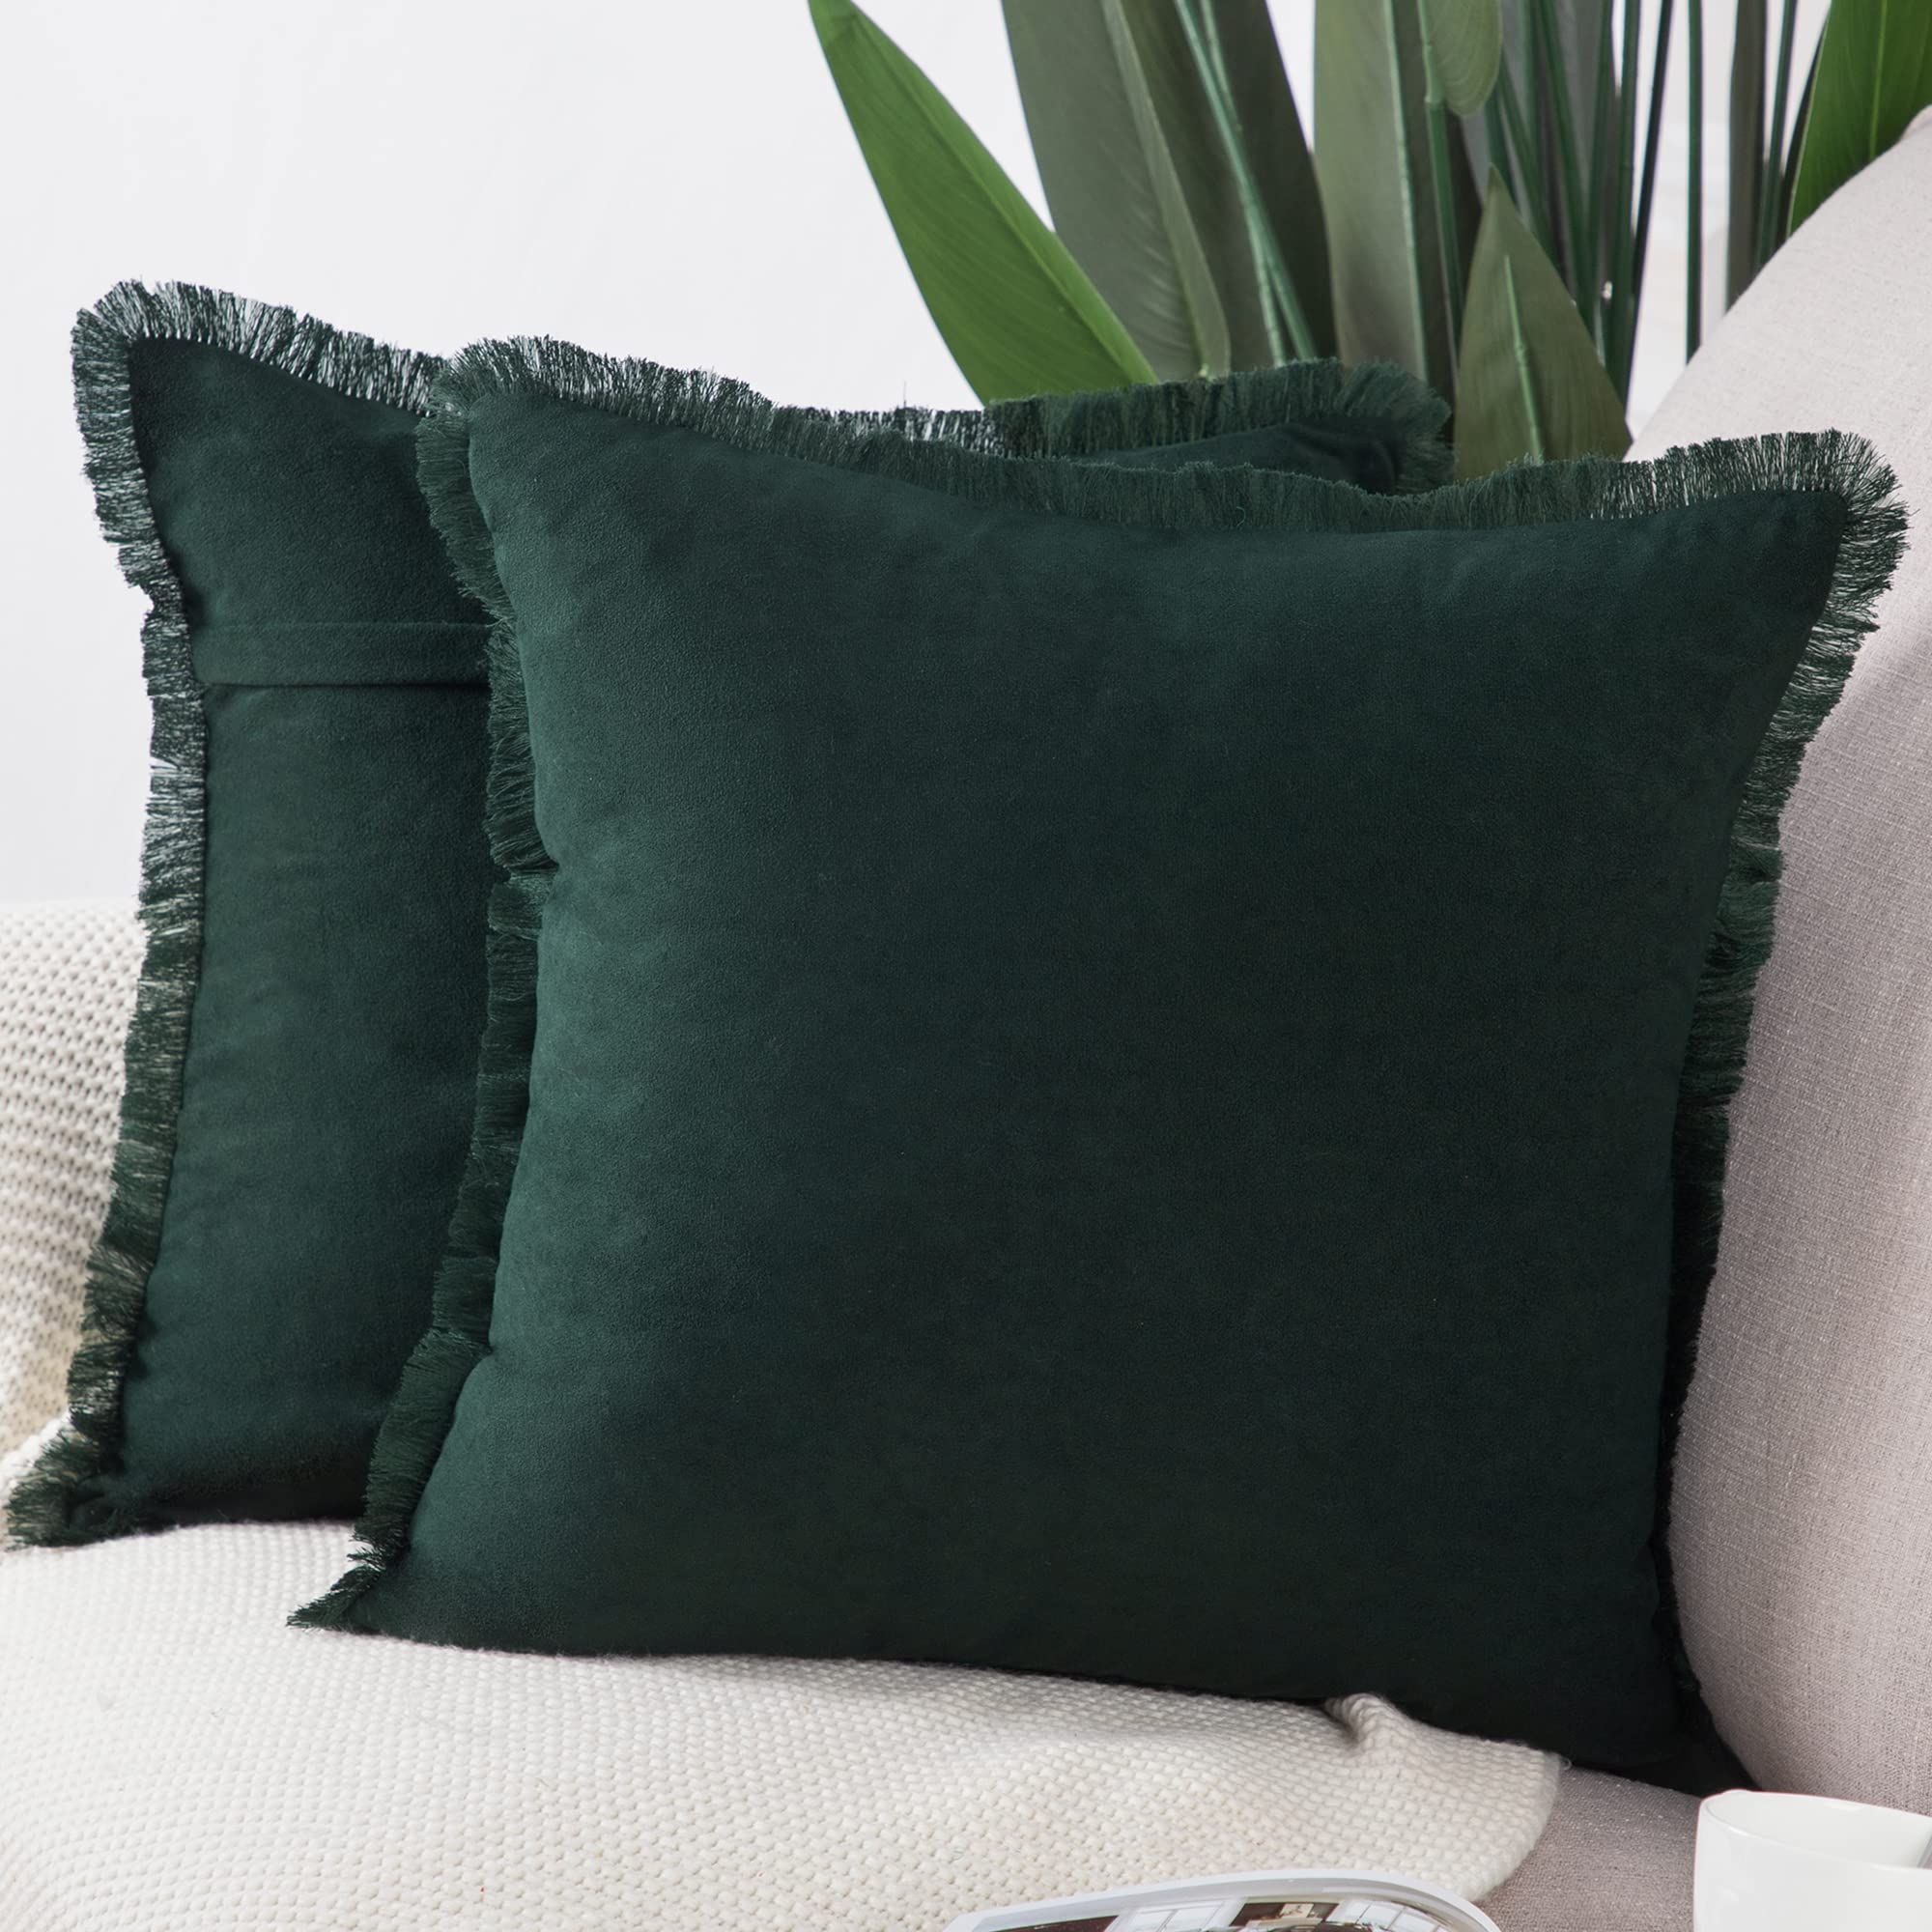 MADIZZ Set of 2 Suede Throw Pillow Covers with Fringe Tassels 16x16 Inch Dark Green Soft Decorative  | Amazon (US)